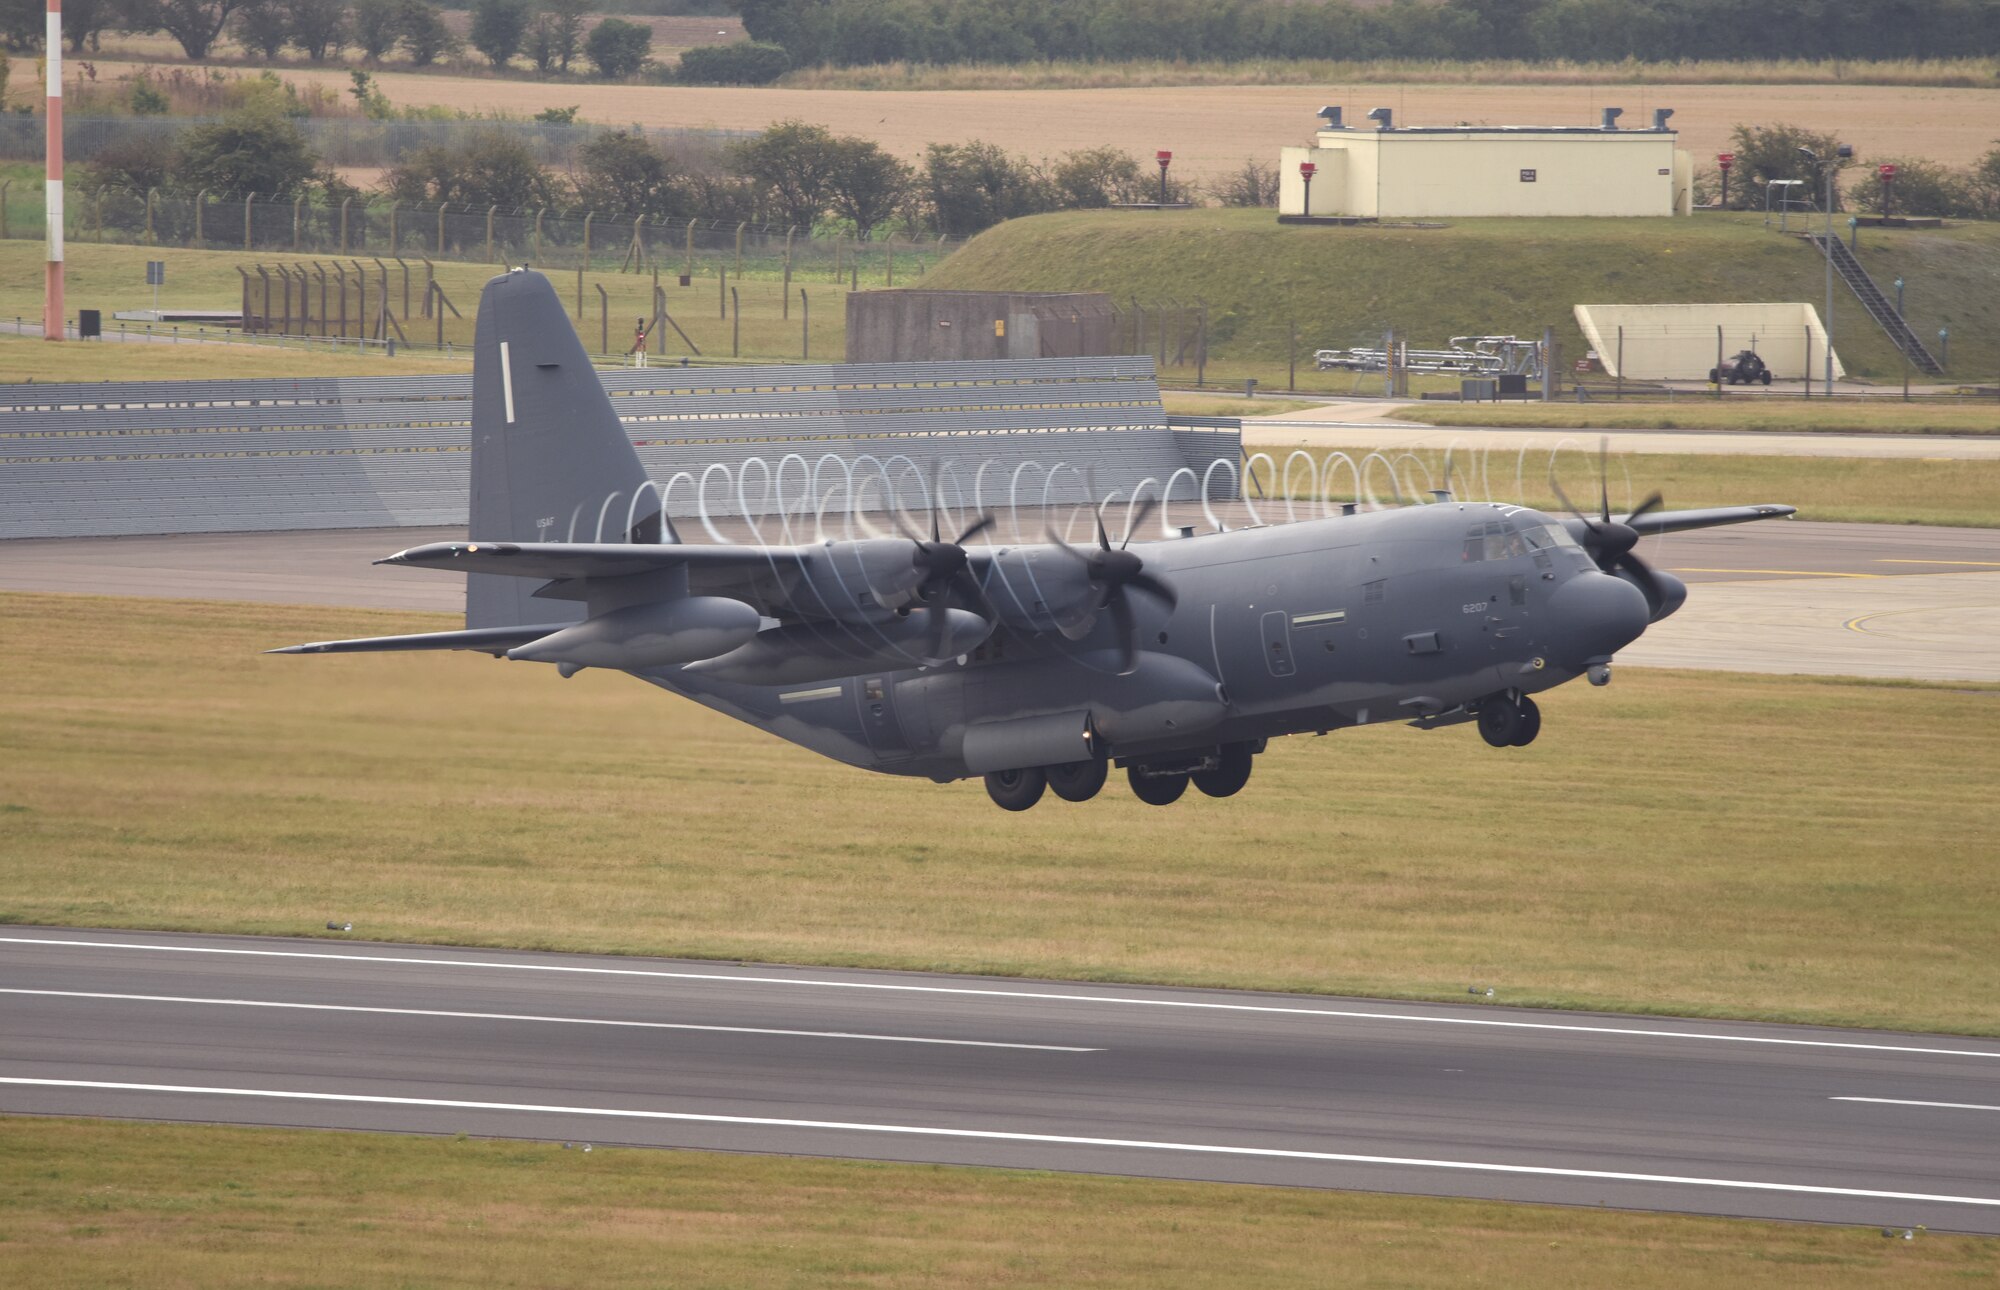 A U.S. Air Force MC-130J Commando II aircraft assigned to the 352nd Special Operations Wing takes off during an elephant walk at Royal Air Force Mildenhall, England, Sept. 13, 2021. An elephant walk is a term used by the U.S. Air Force when multiple aircraft taxi together before takeoff. (U.S. Air Force photo by Karen Abeyasekere)